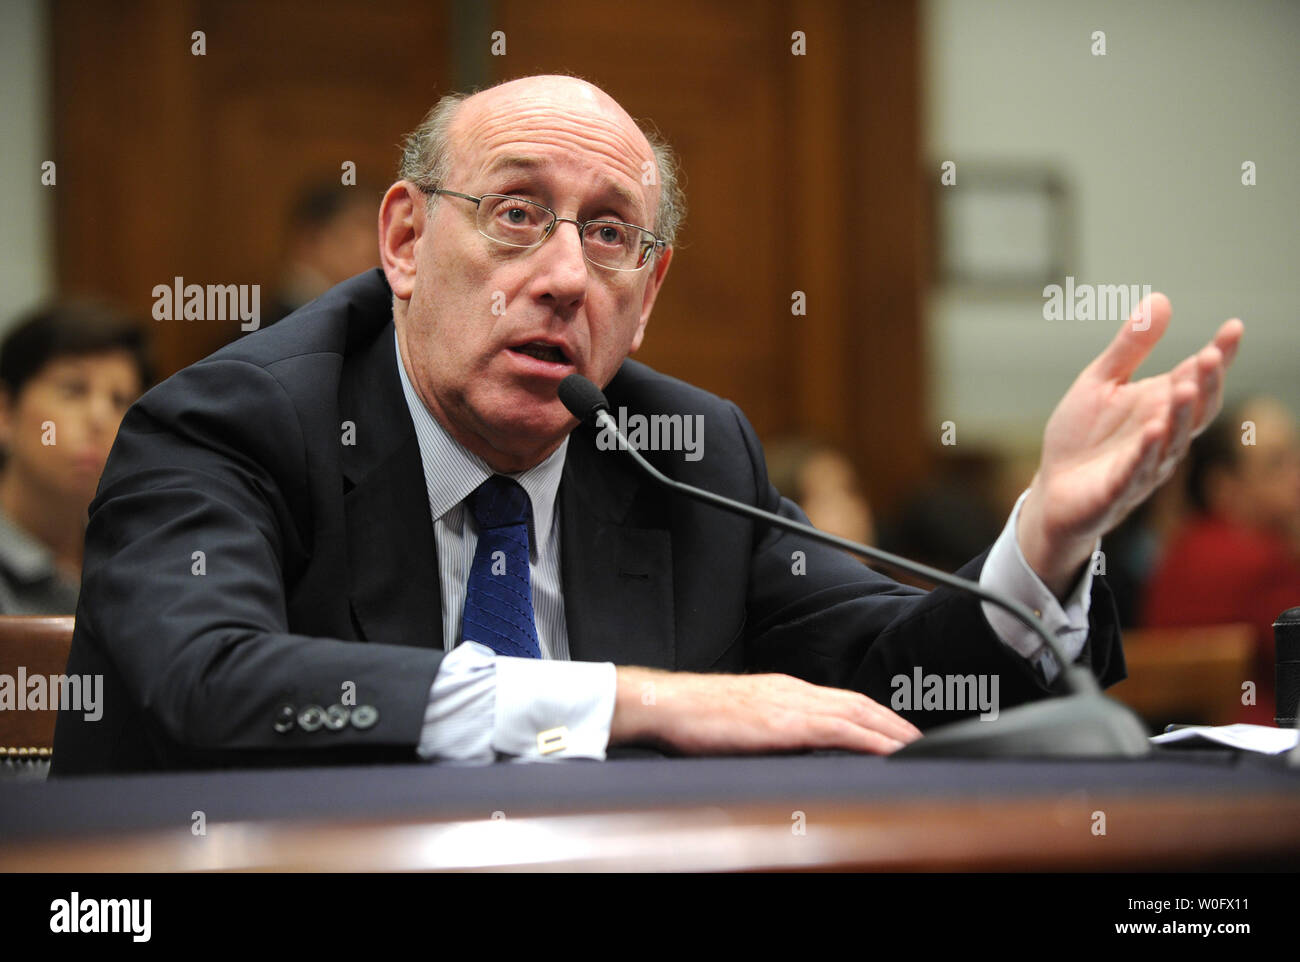 Kenneth Feinberg, administrator of the BP Oil Spill Victim Compensation Fund, testifies before a House Judiciary Committee hearing on 'Ensuring Justice for Victims of the Gulf Coast Oil Disaster in Washington on July 21, 2010.   UPI/Kevin Dietsch. Stock Photo